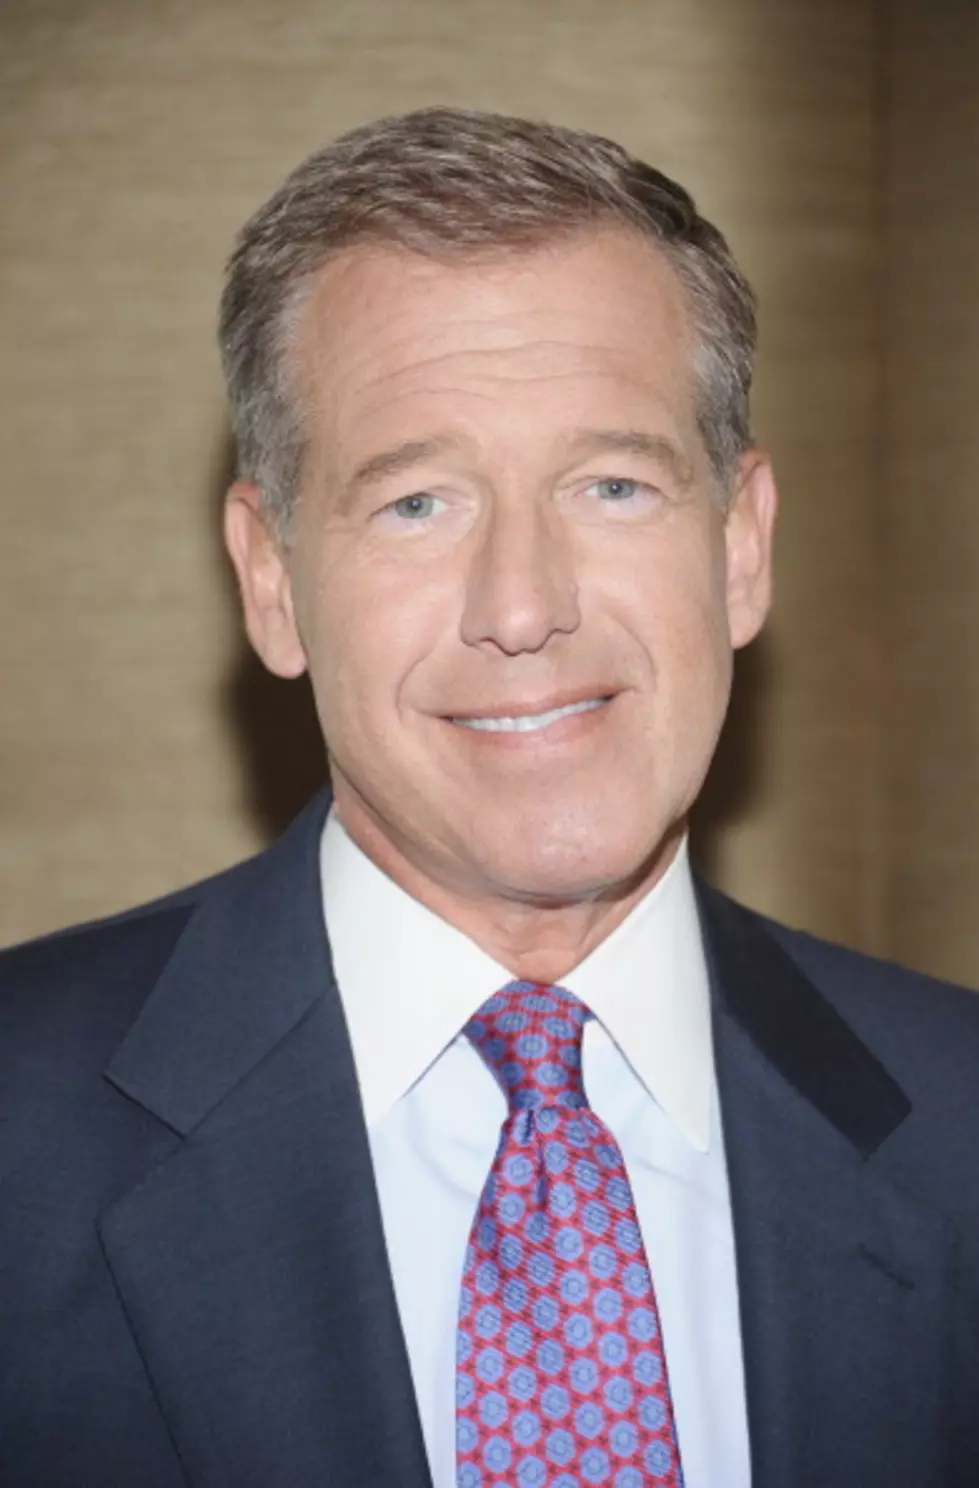 Brian Williams and Lester Holt Rap on Jimmy Fallon [Watch]